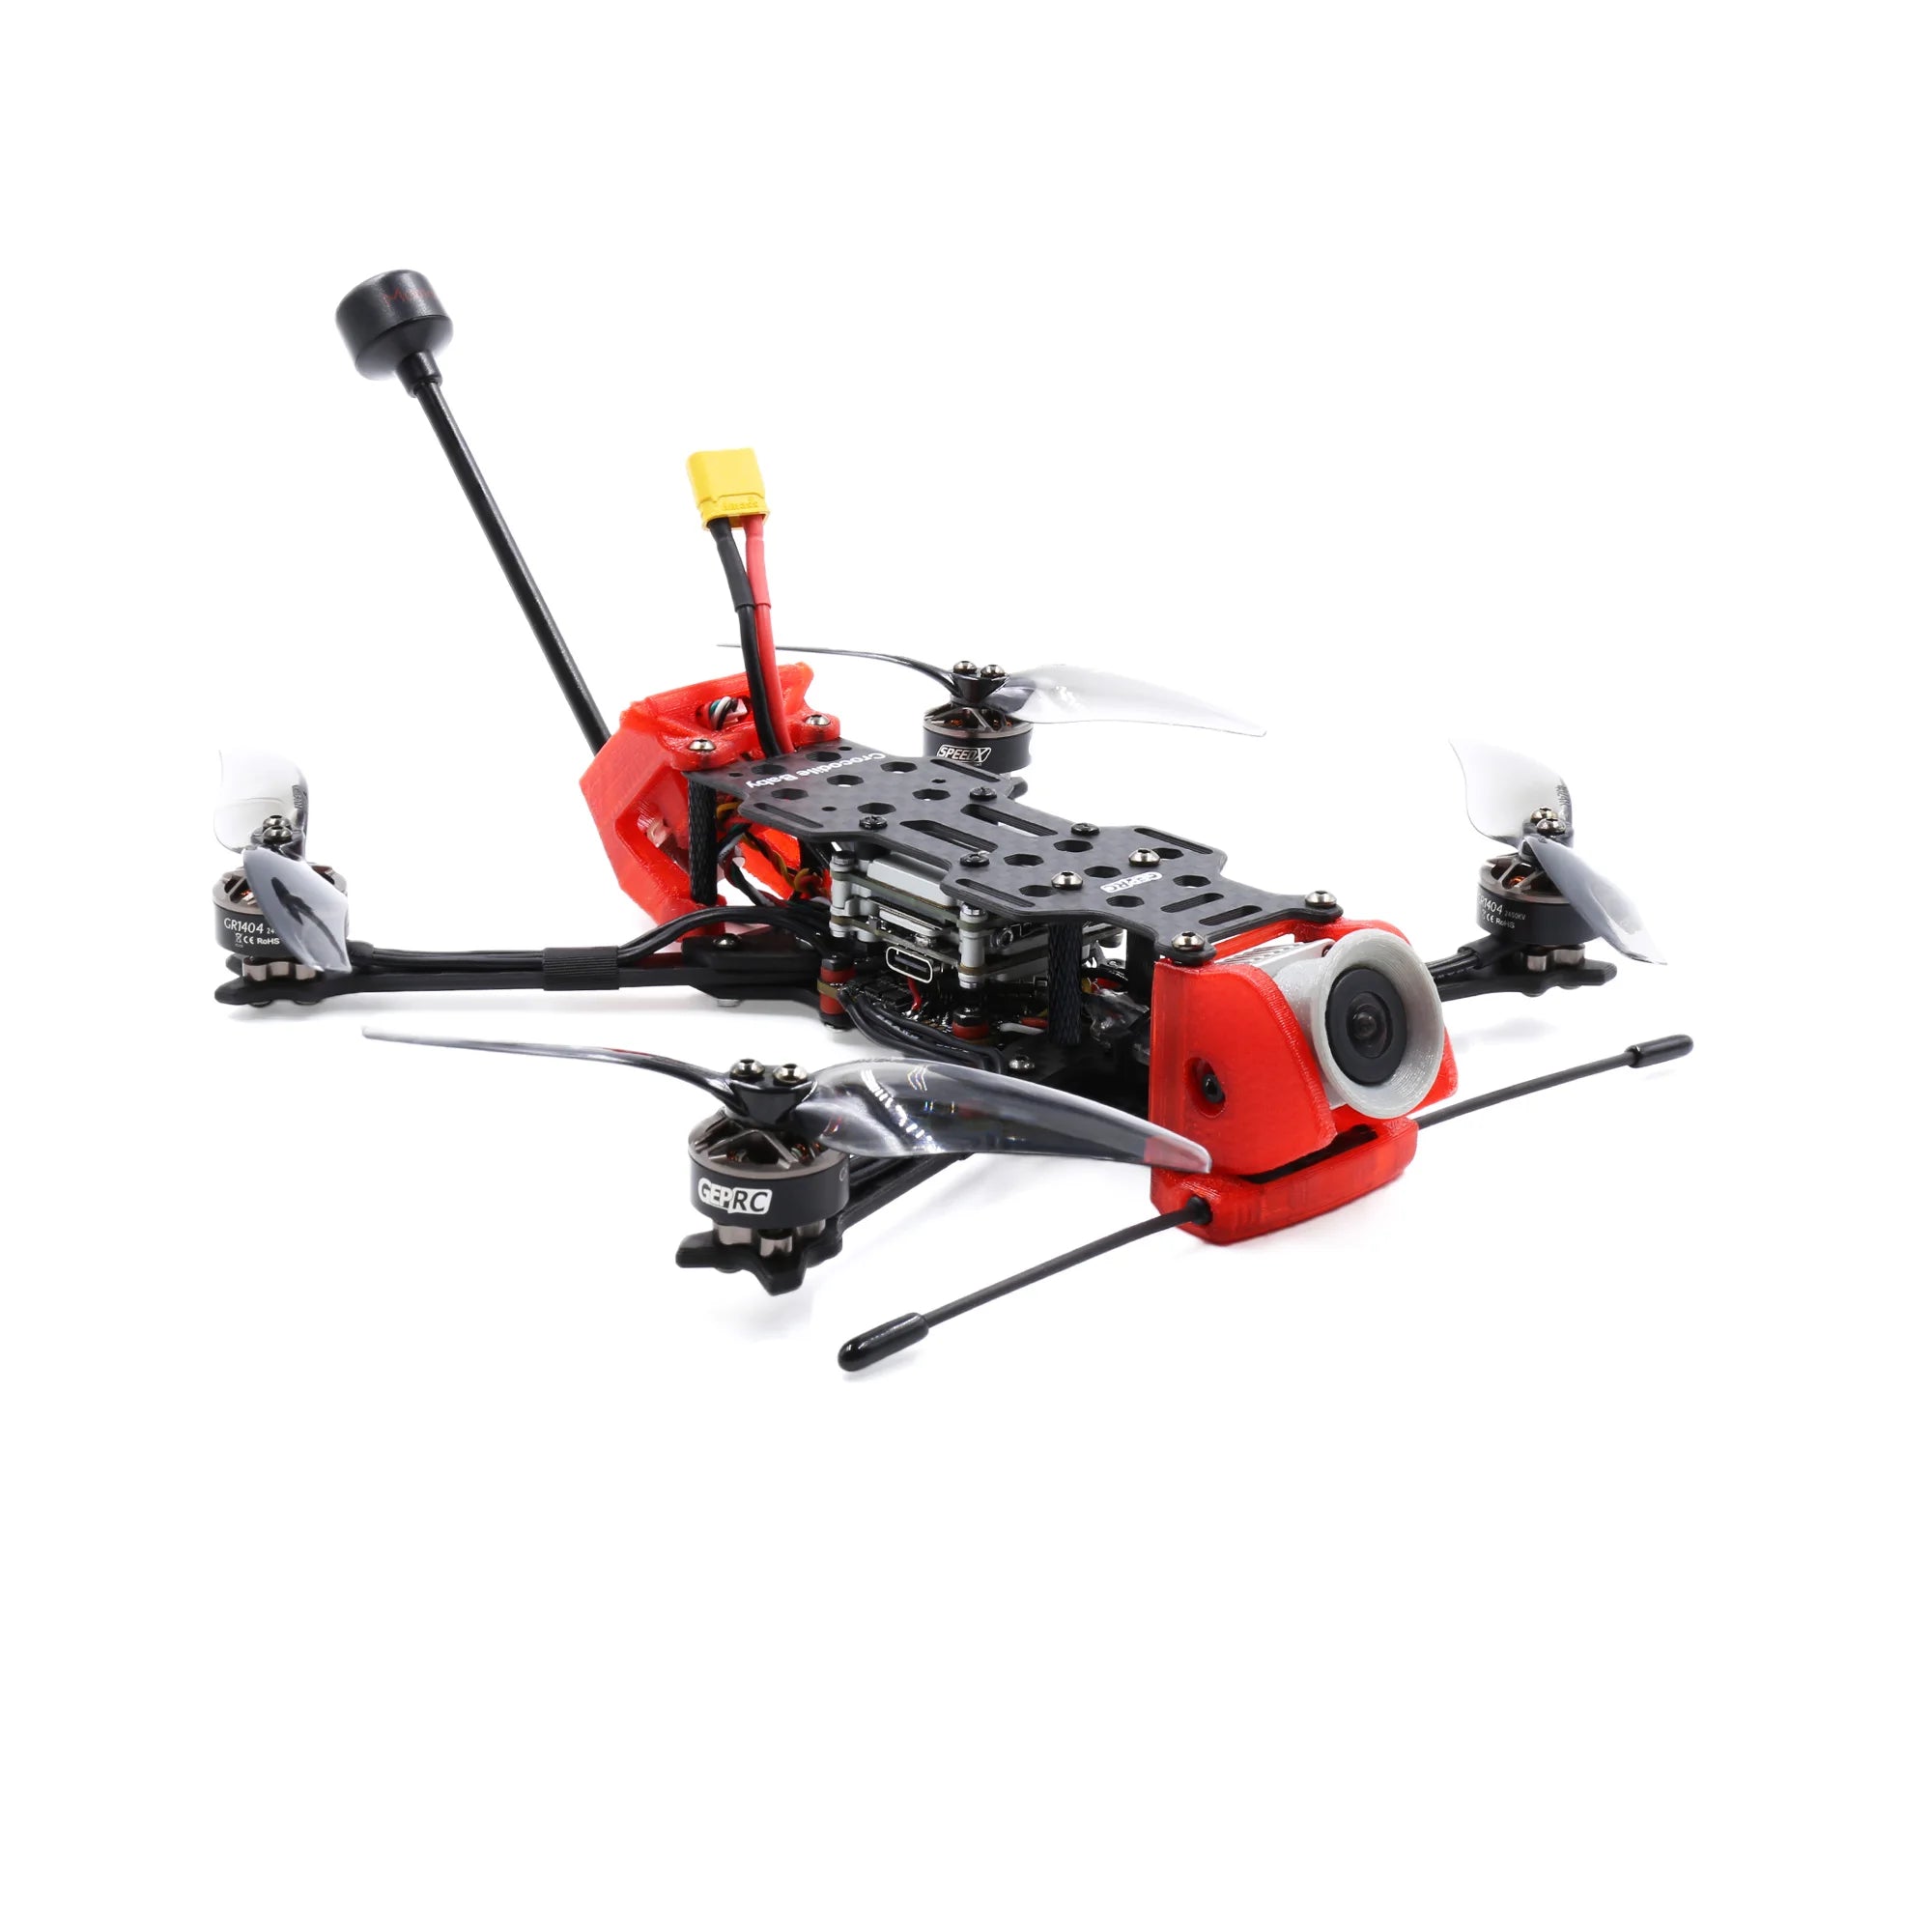 GEPRC Crocodile Baby 4 FPV Drone, Crocodile Baby 4 inch is assembled and debugged by GEPRC TEAM